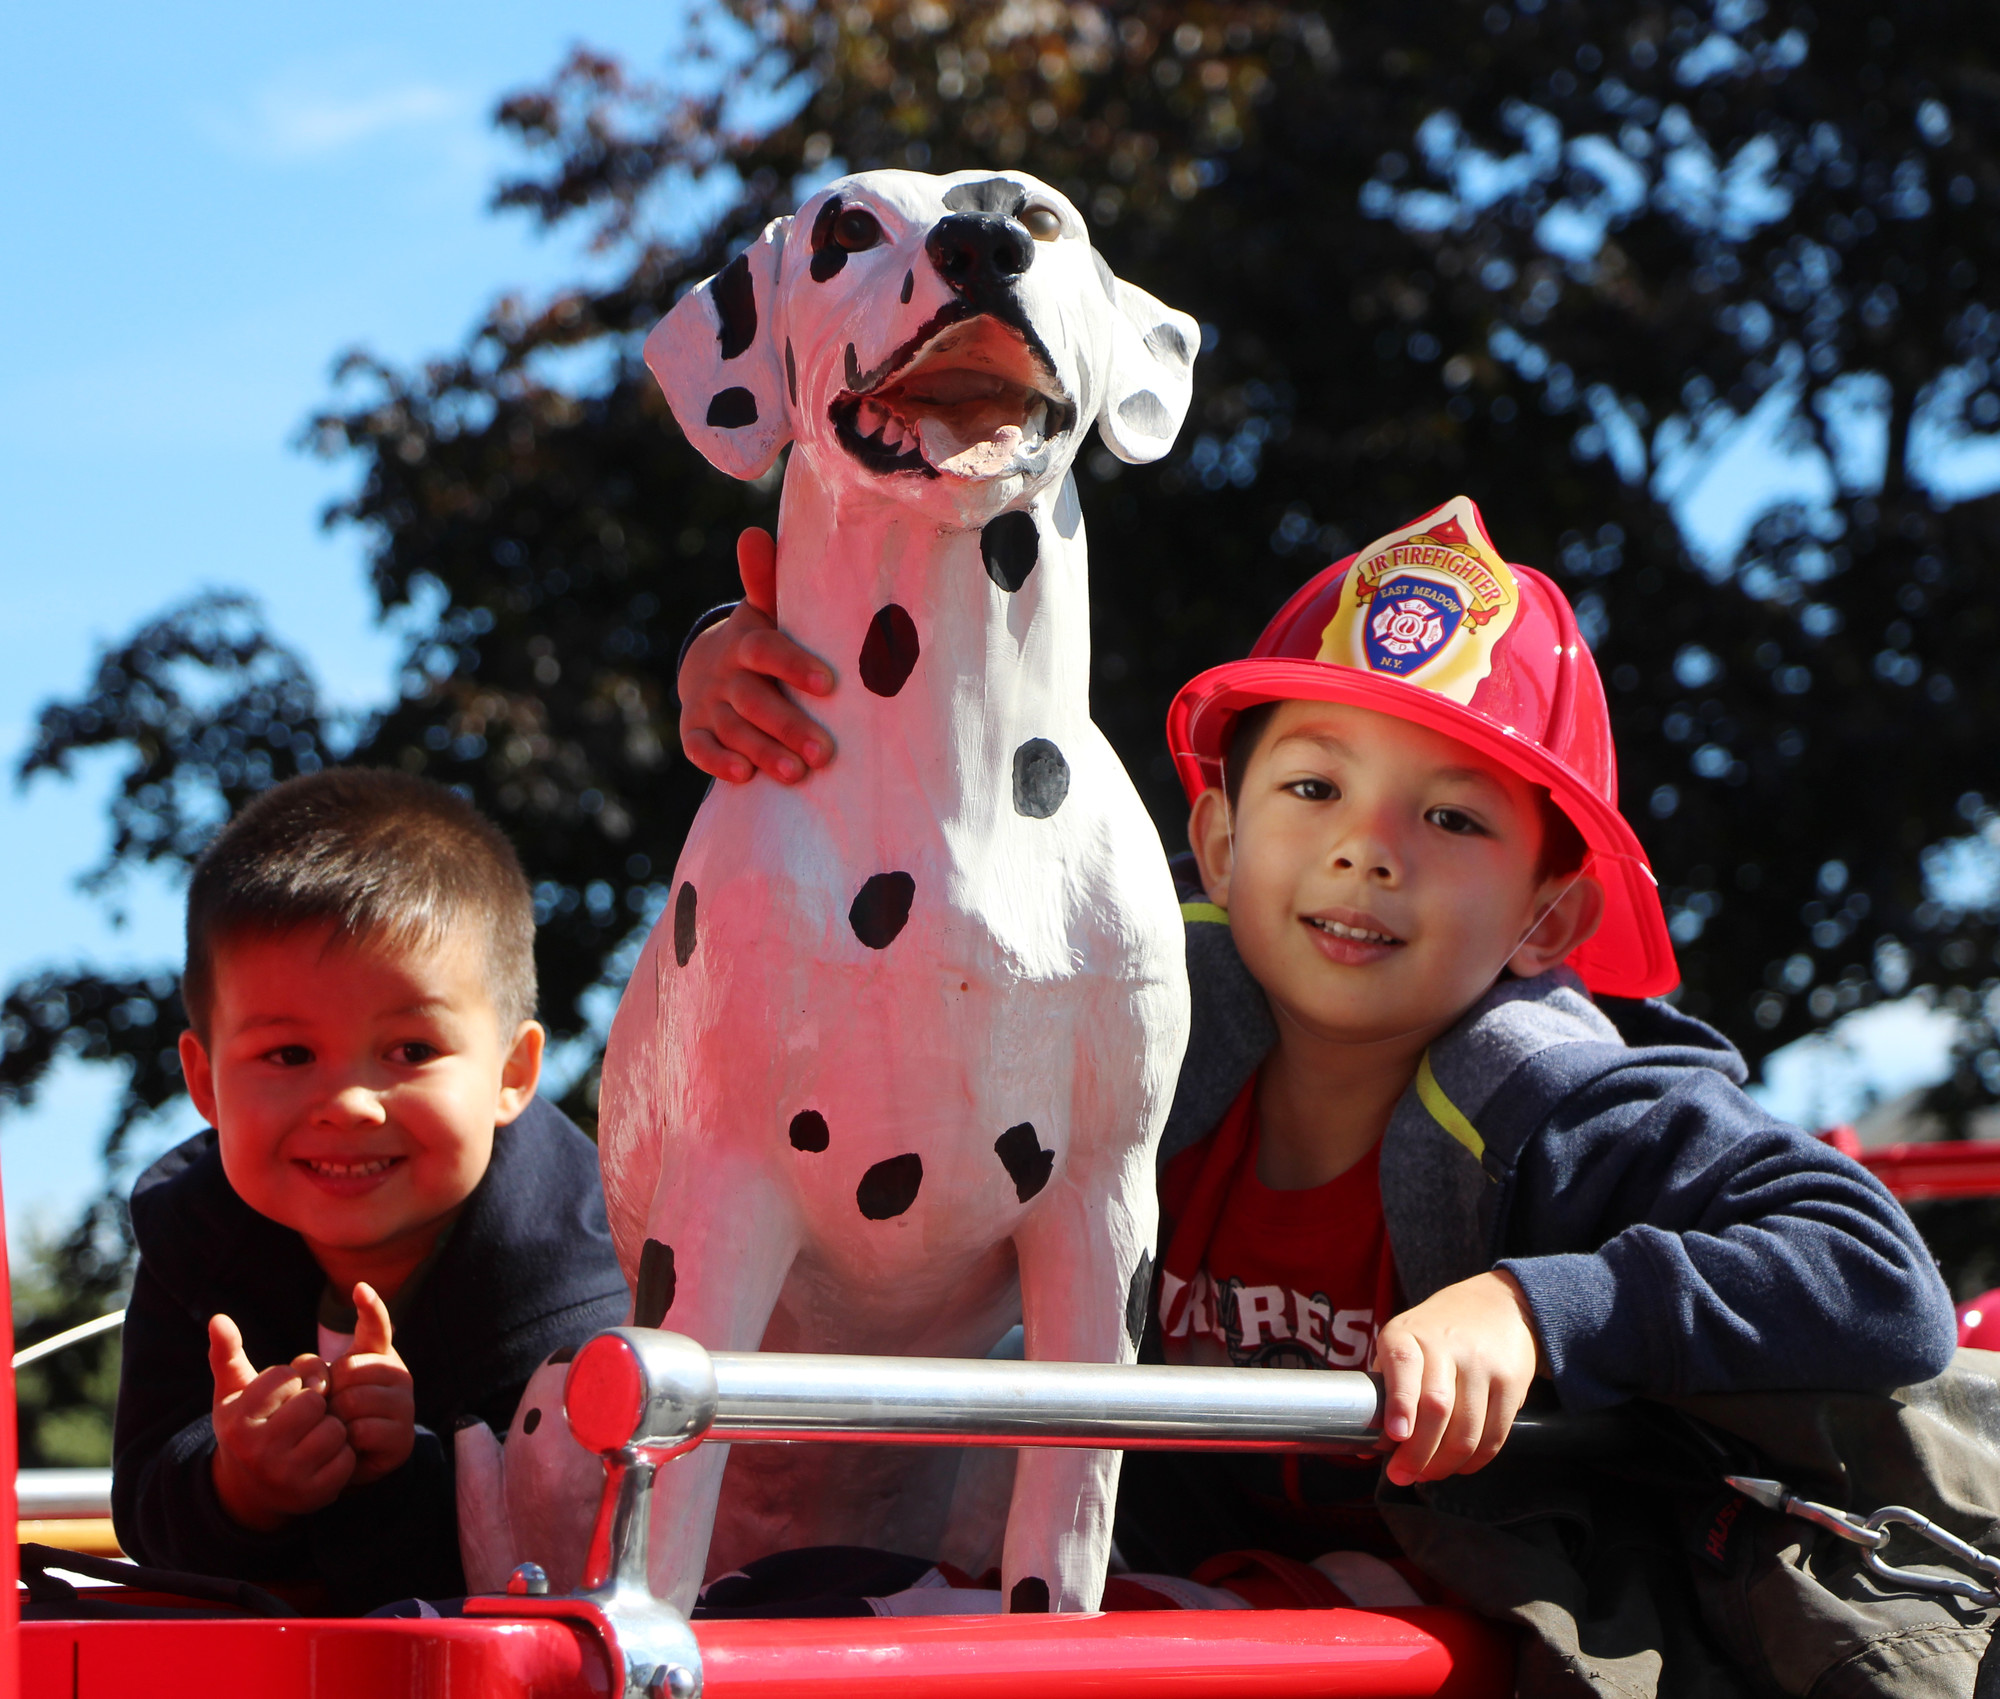 Ryan Chan, 3, and his brother, Joshua, 4, with every firefighter’s favorite spotted companion last Sunday at the East Meadow Fire Department’s Open House.